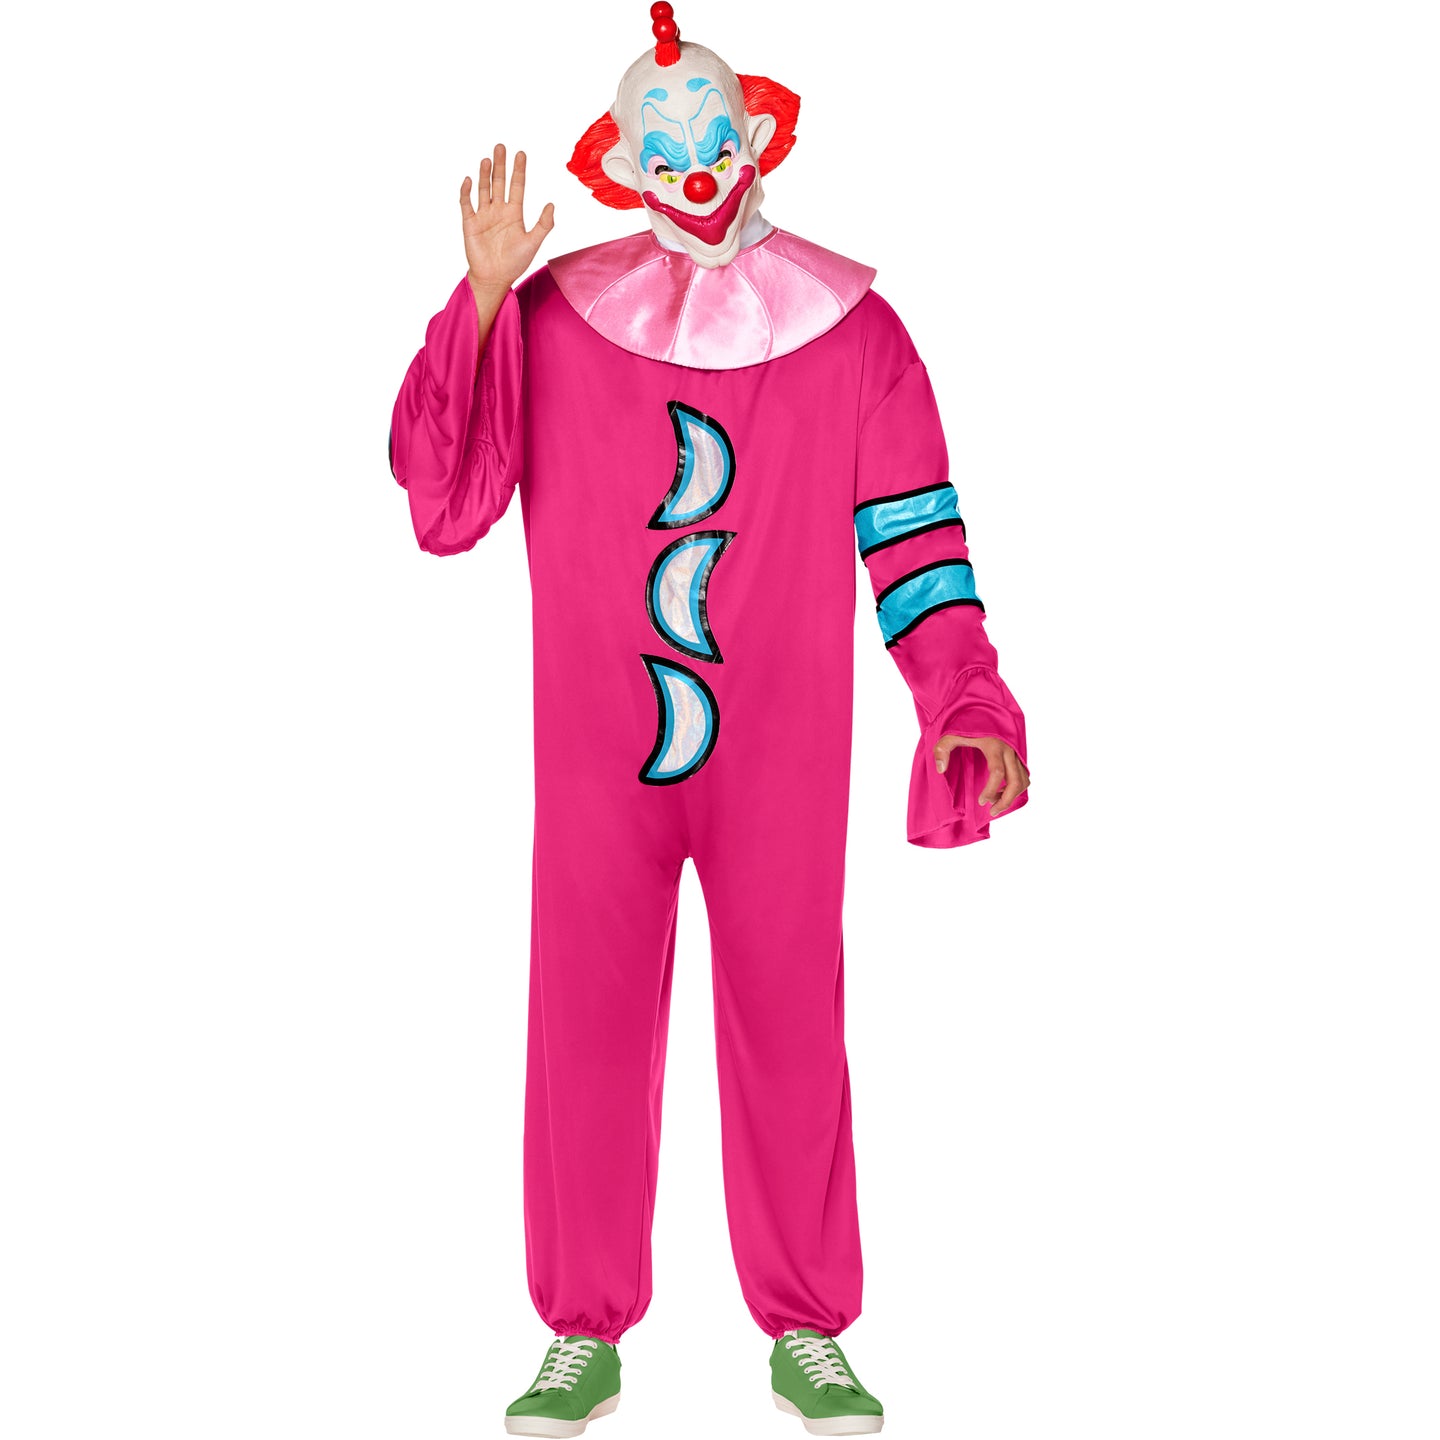 InSpirit Designs Adult Killer Klowns From Outer Space Slim Costume